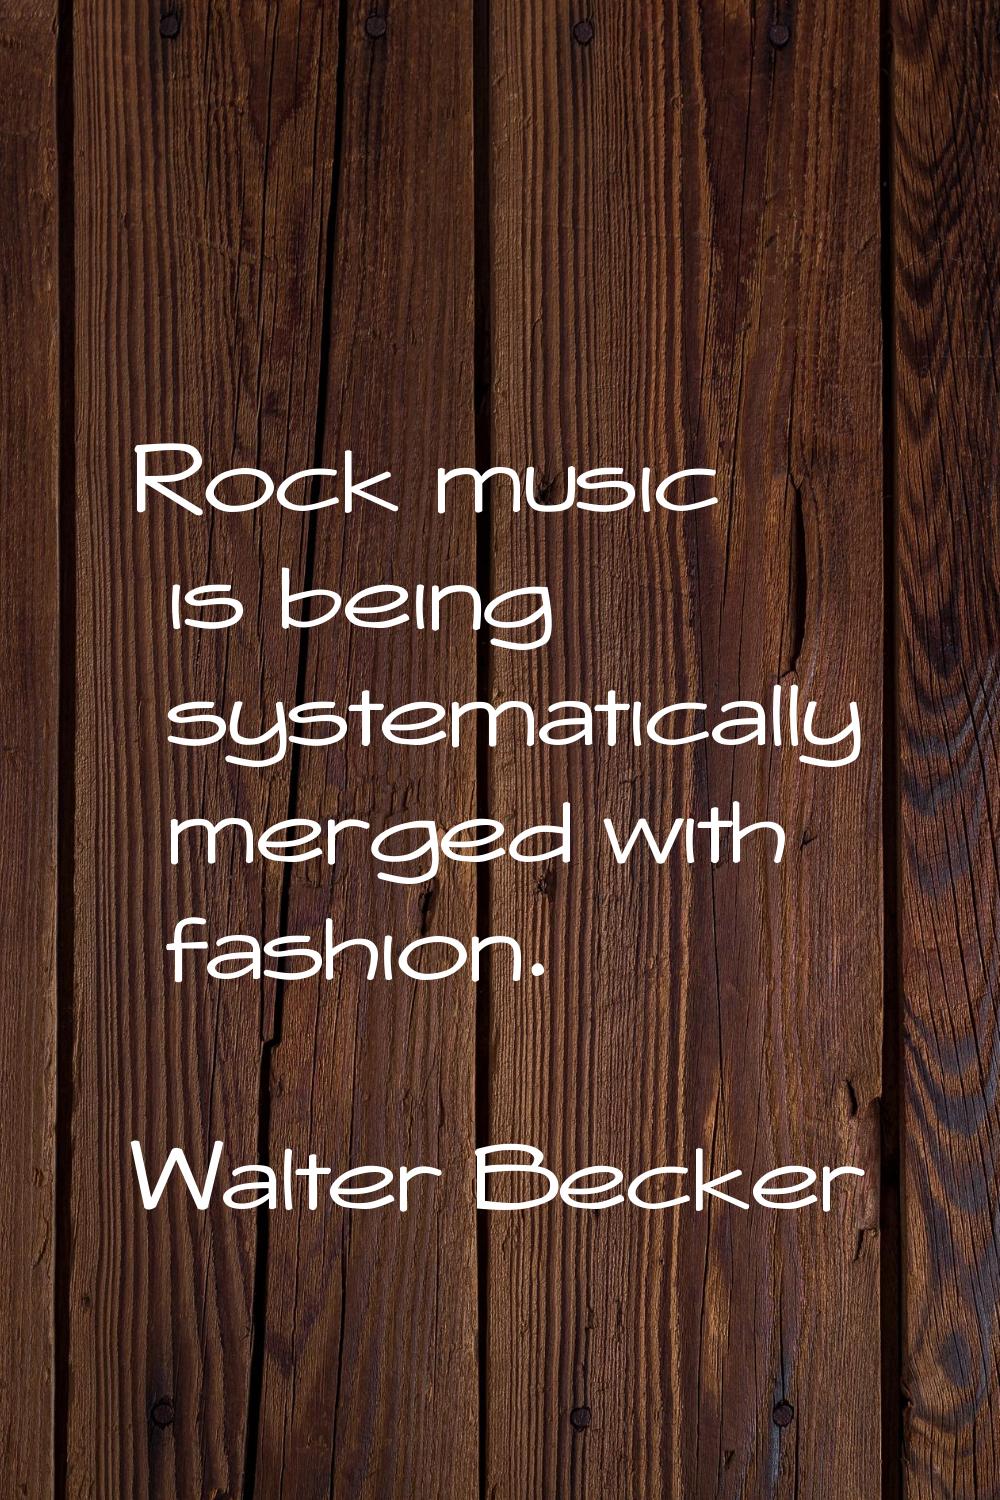 Rock music is being systematically merged with fashion.